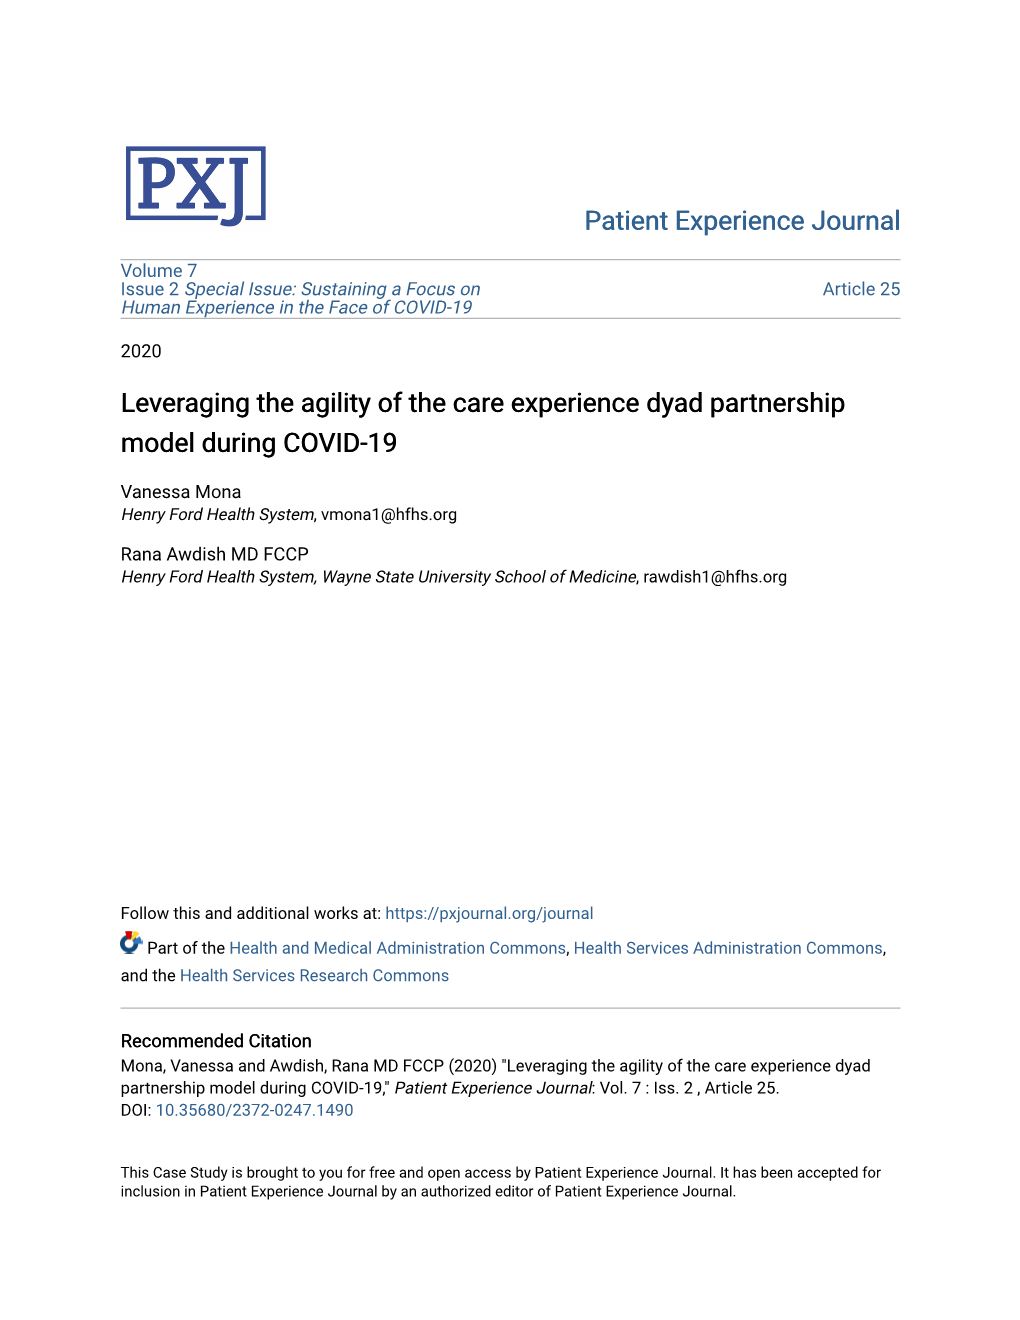 Leveraging the Agility of the Care Experience Dyad Partnership Model During COVID-19